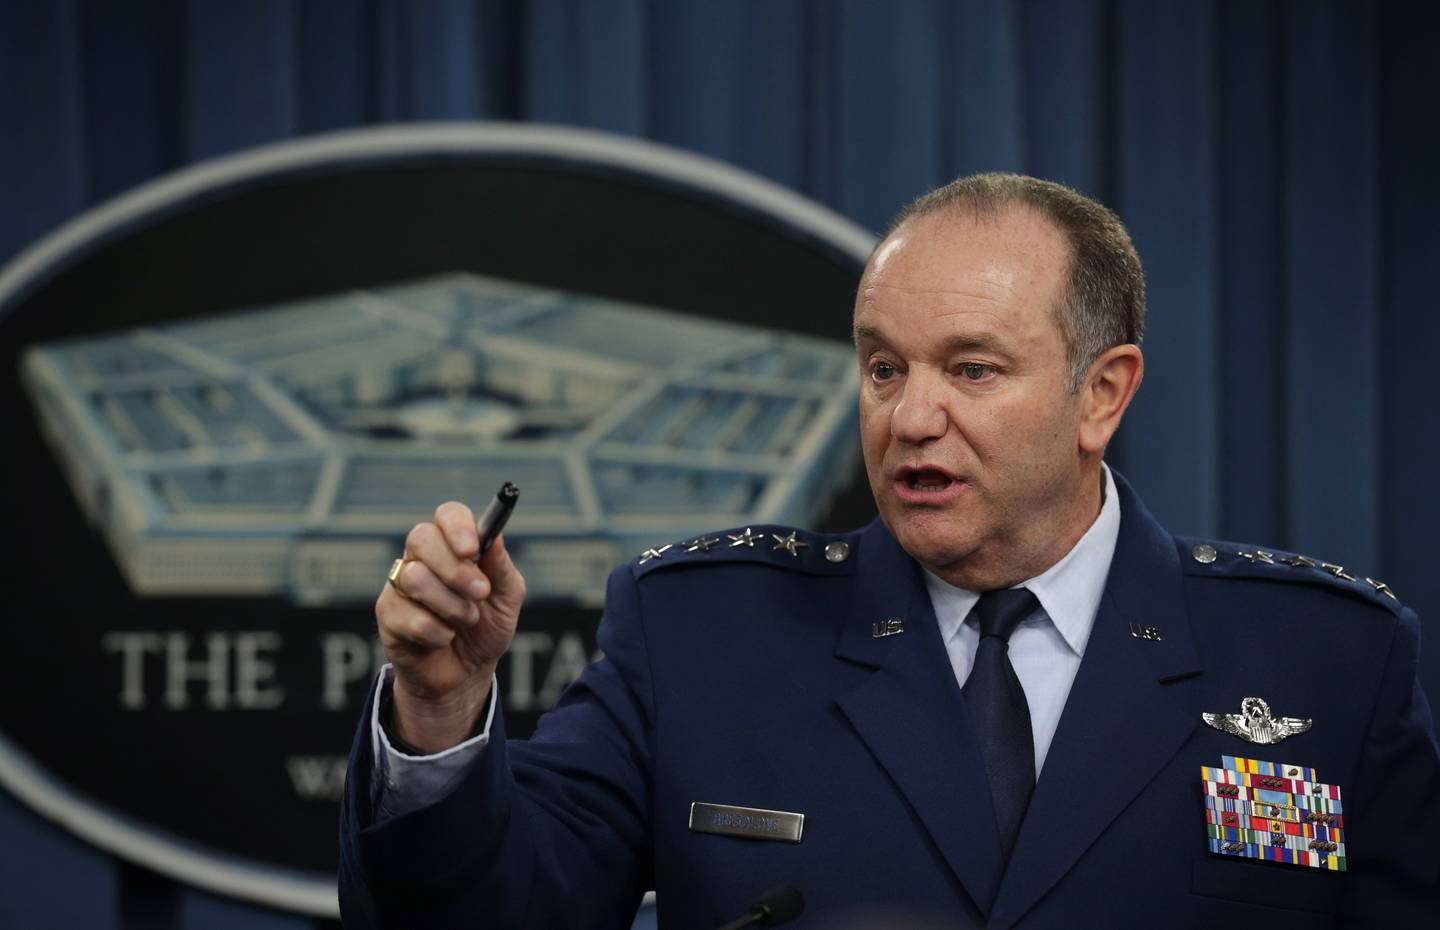 ARLINGTON, VA - FEBRUARY 25: U.S. European Commander Air Force Gen. Philip Breedlove conducts a news briefing February 25, 2015 at the Pentagon in Arlington, Virginia. Gen. Breedlove discussed the current situation of the Russian military intervention in Ukraine.   Alex Wong/Getty Images/AFP